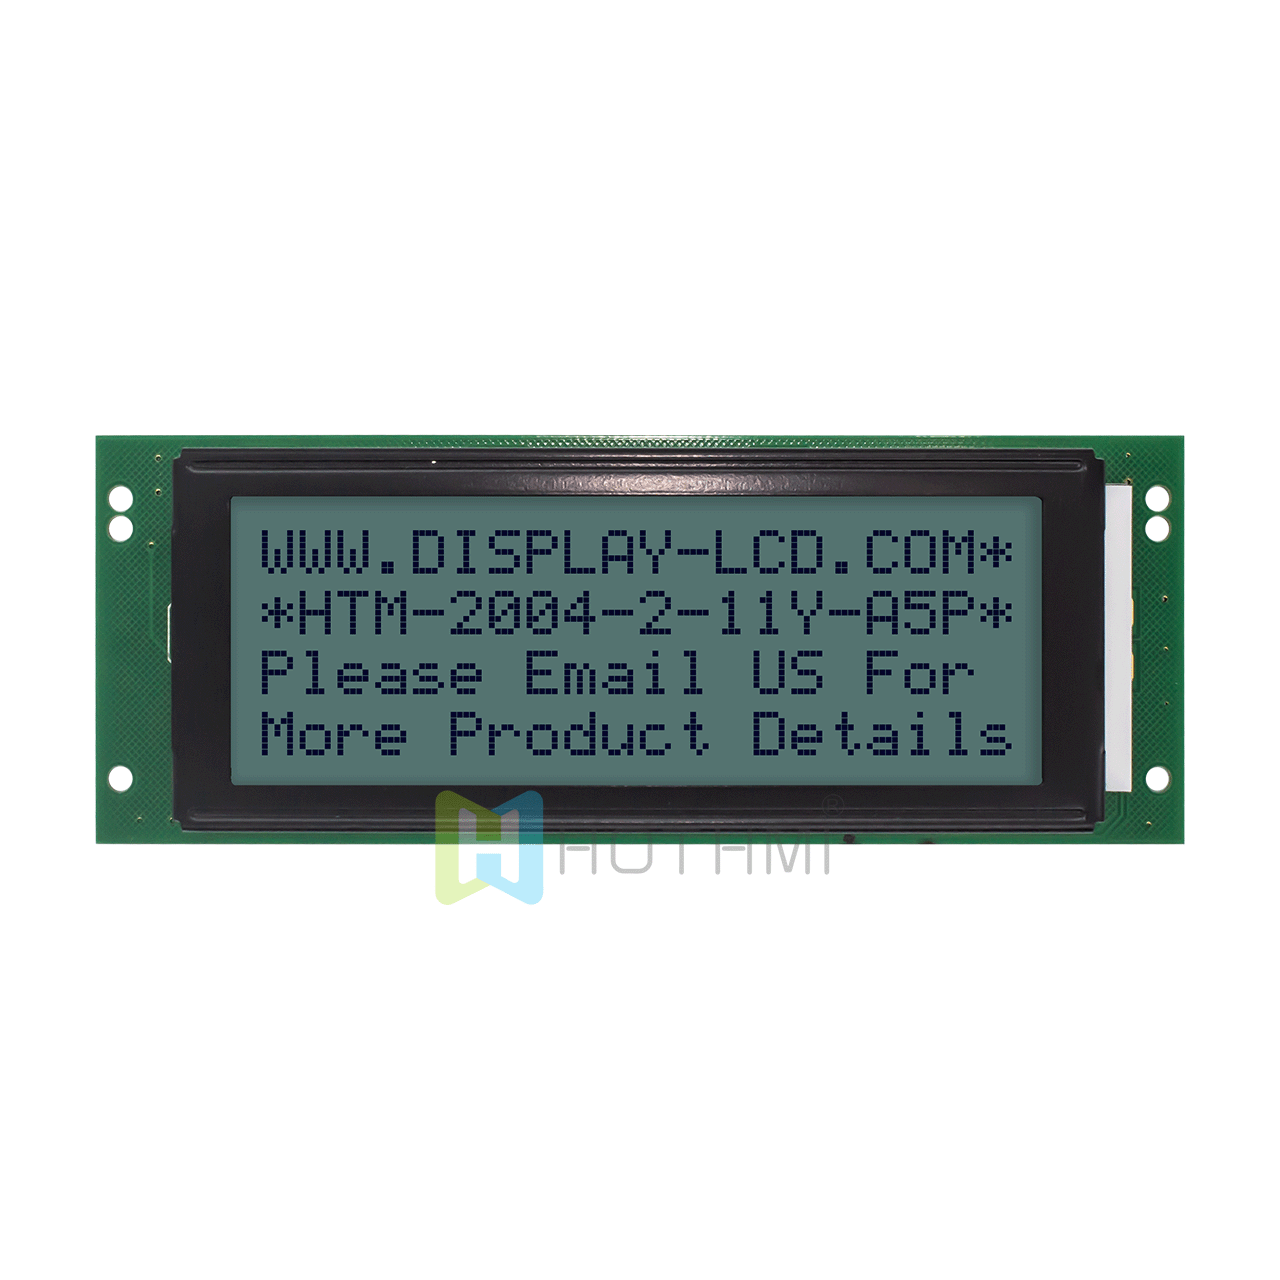 4X20 monochrome character LCD display / STN+ gray display / with yellow-green backlight / Arduino display / transflective LCD display / 5.0v